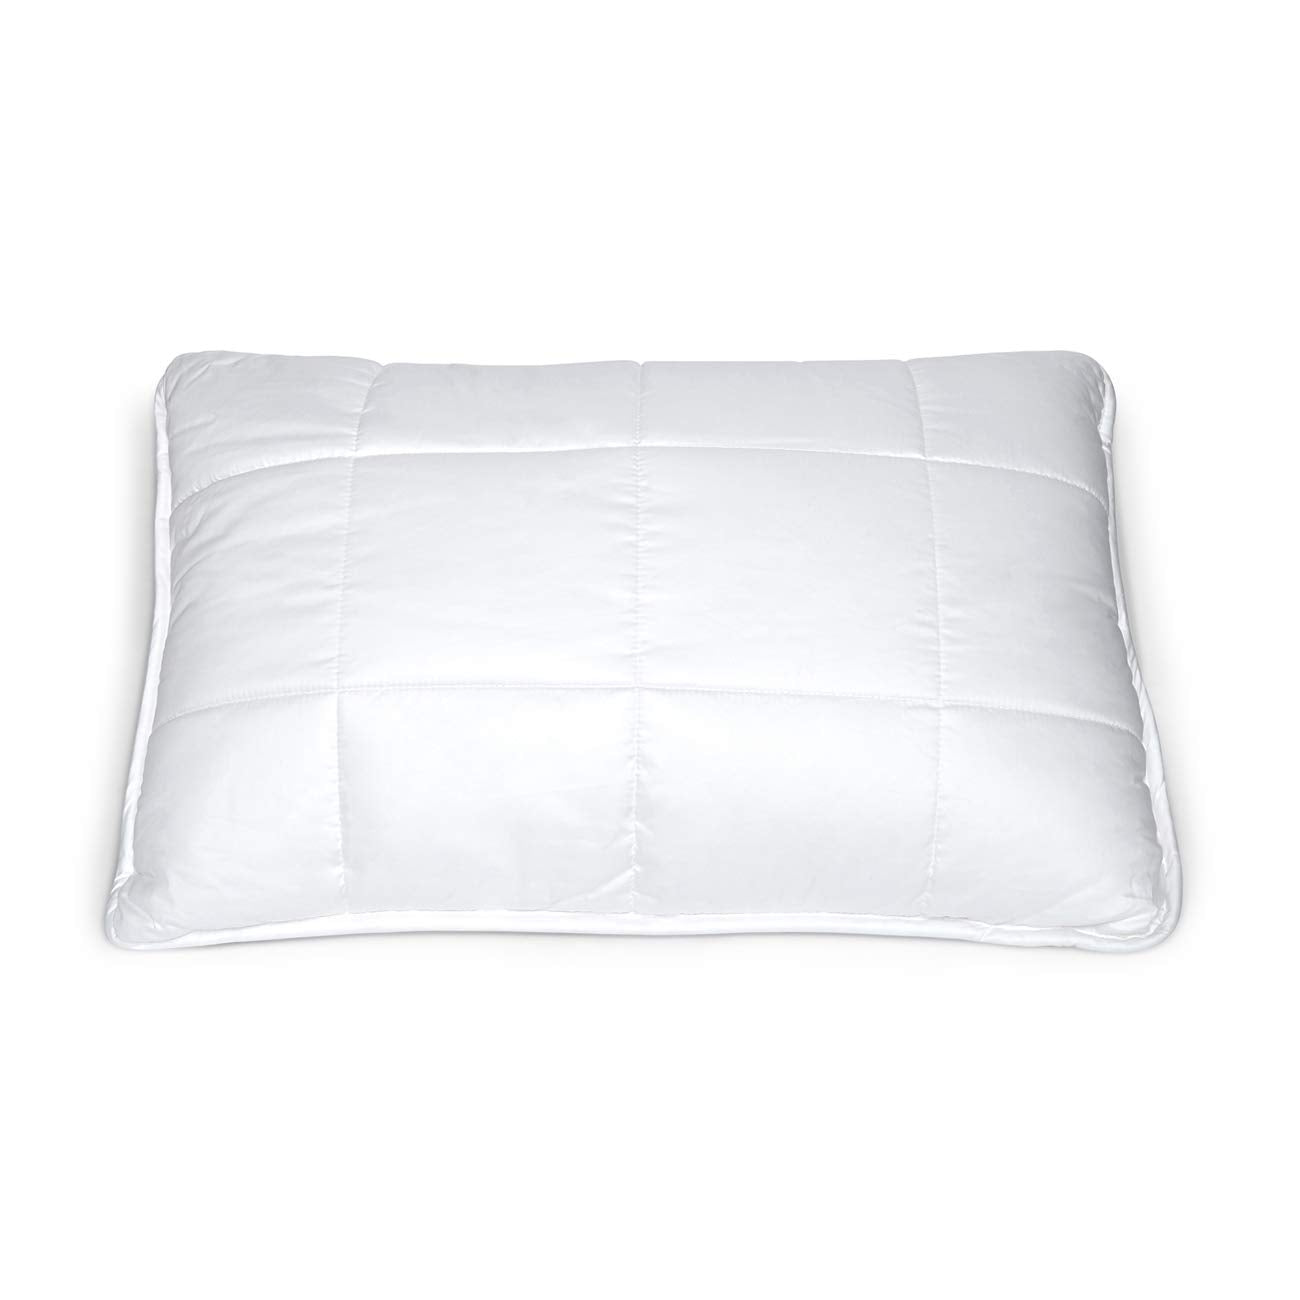 Hush Super Soft (Quilted) Pillow